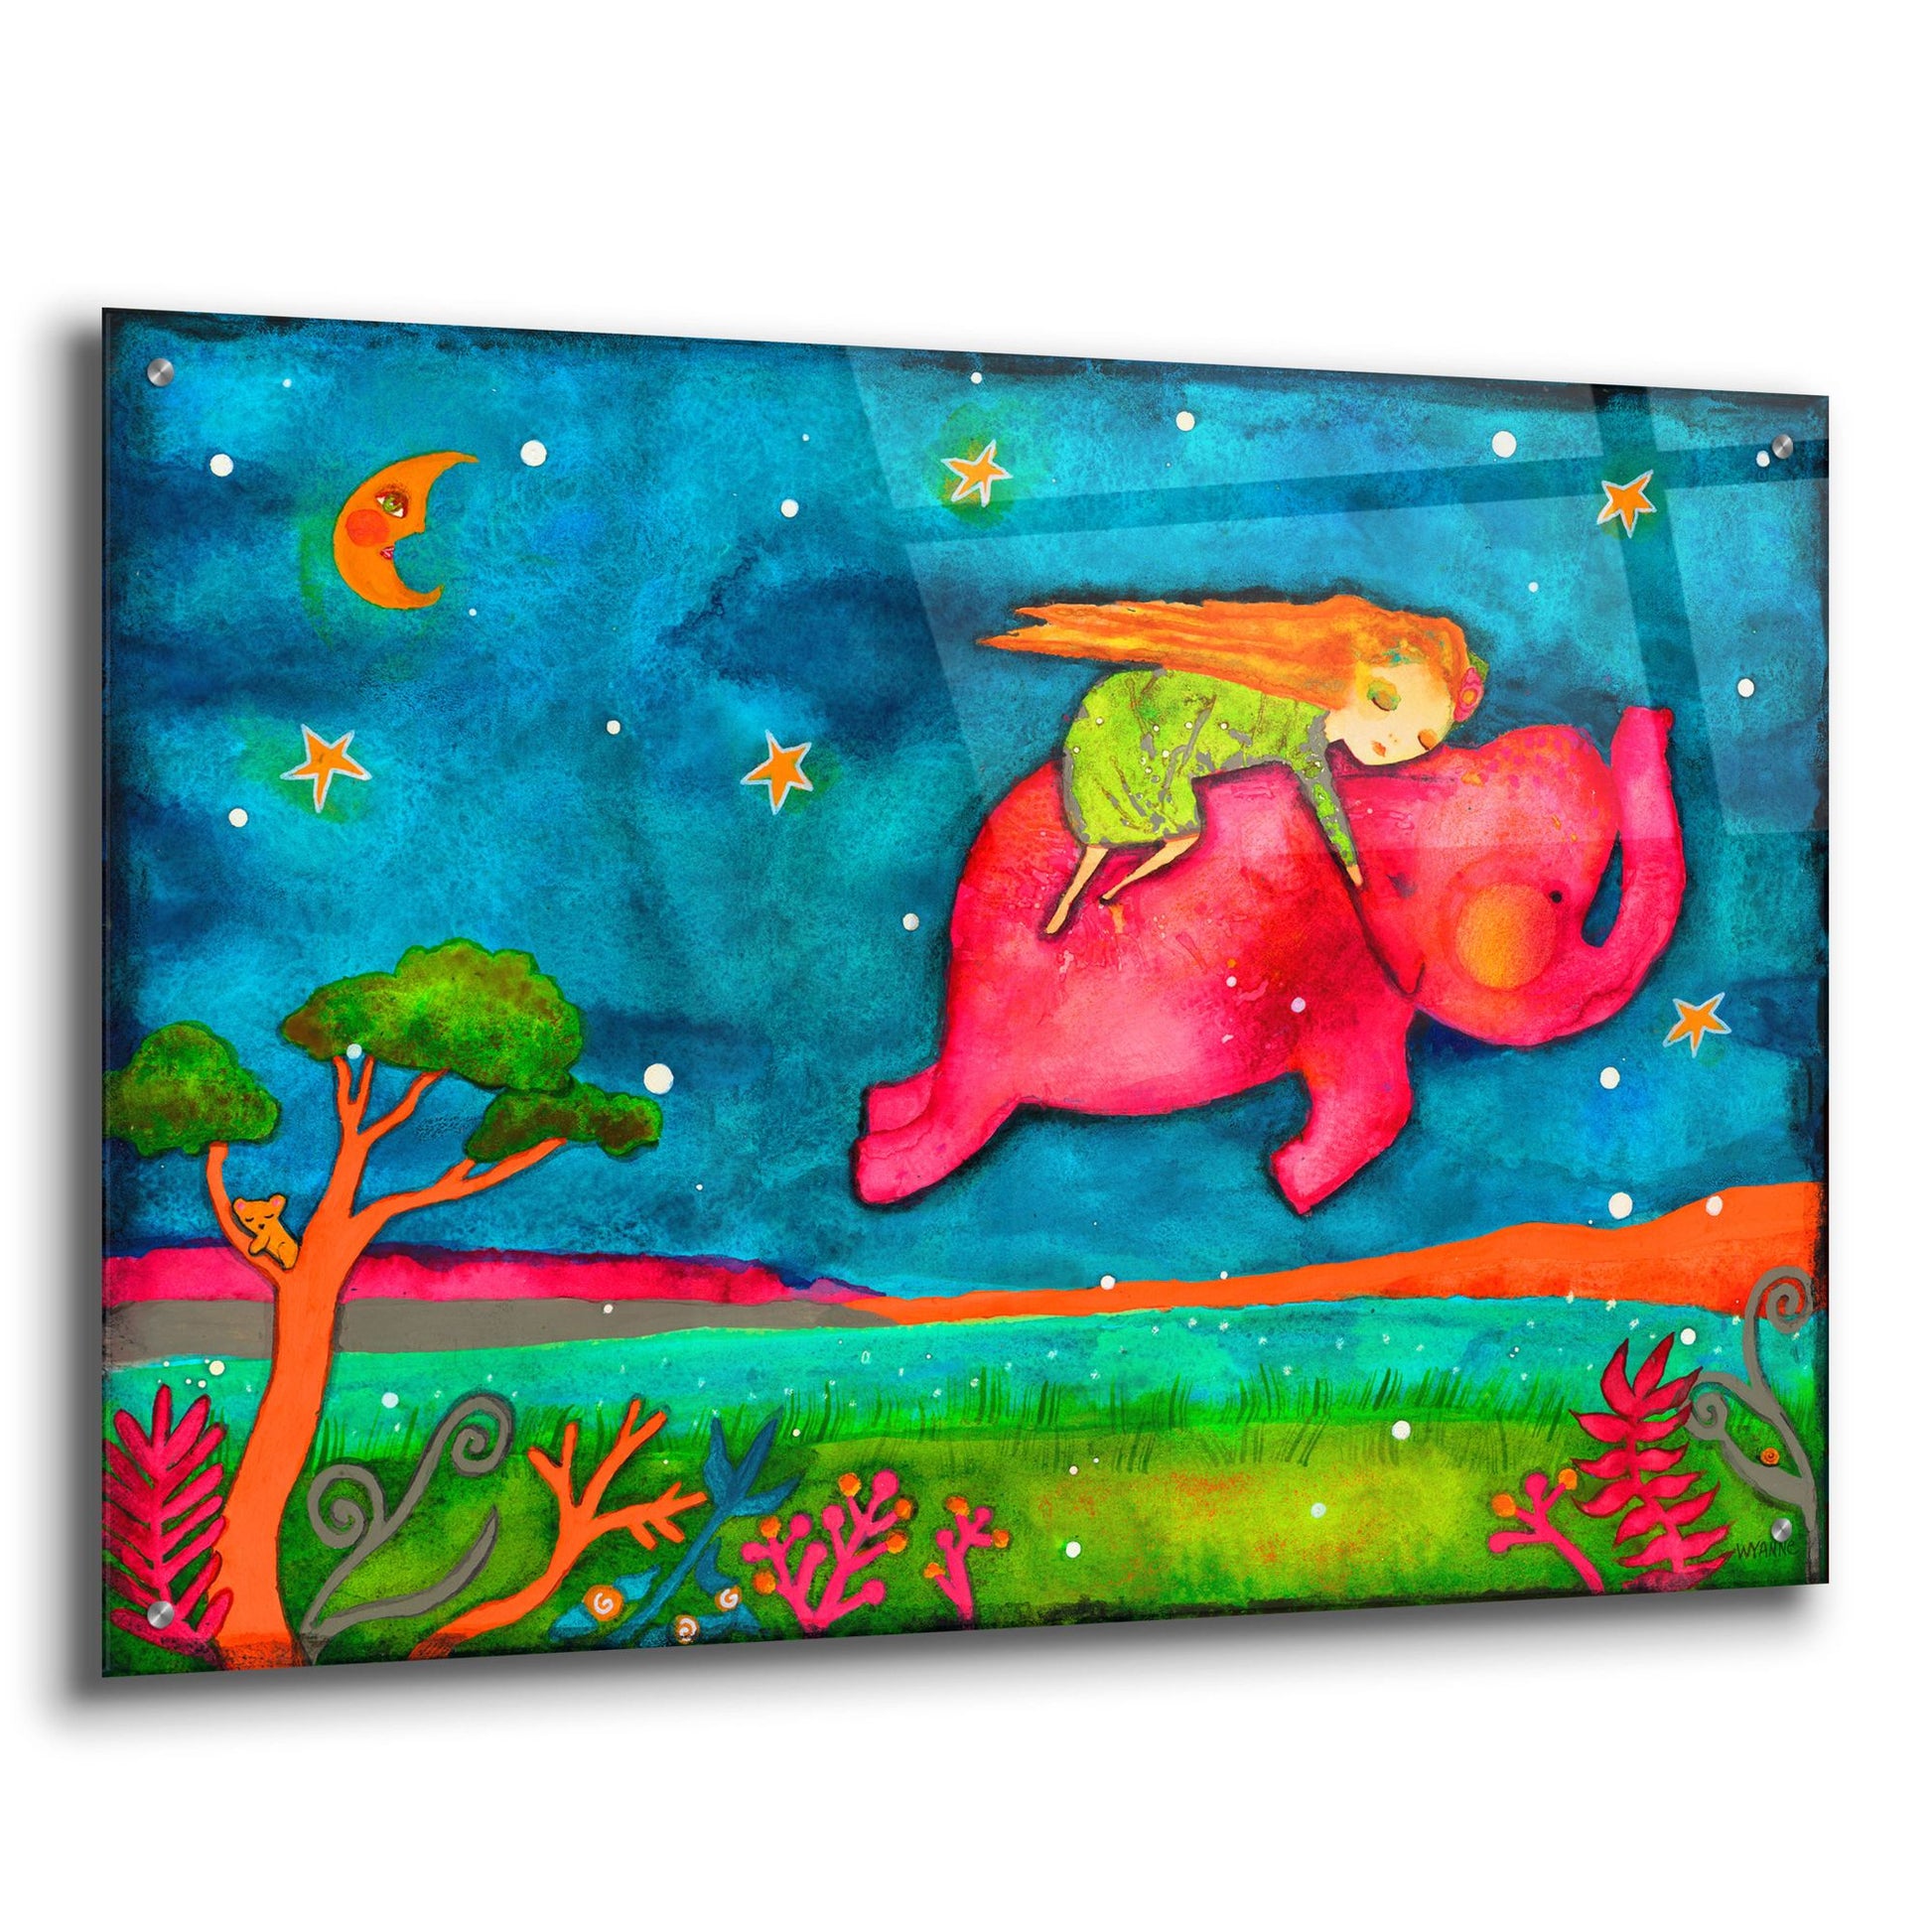 Epic Art 'Come Dream With Me' by Wyanne, Acrylic Glass Wall Art,36x24